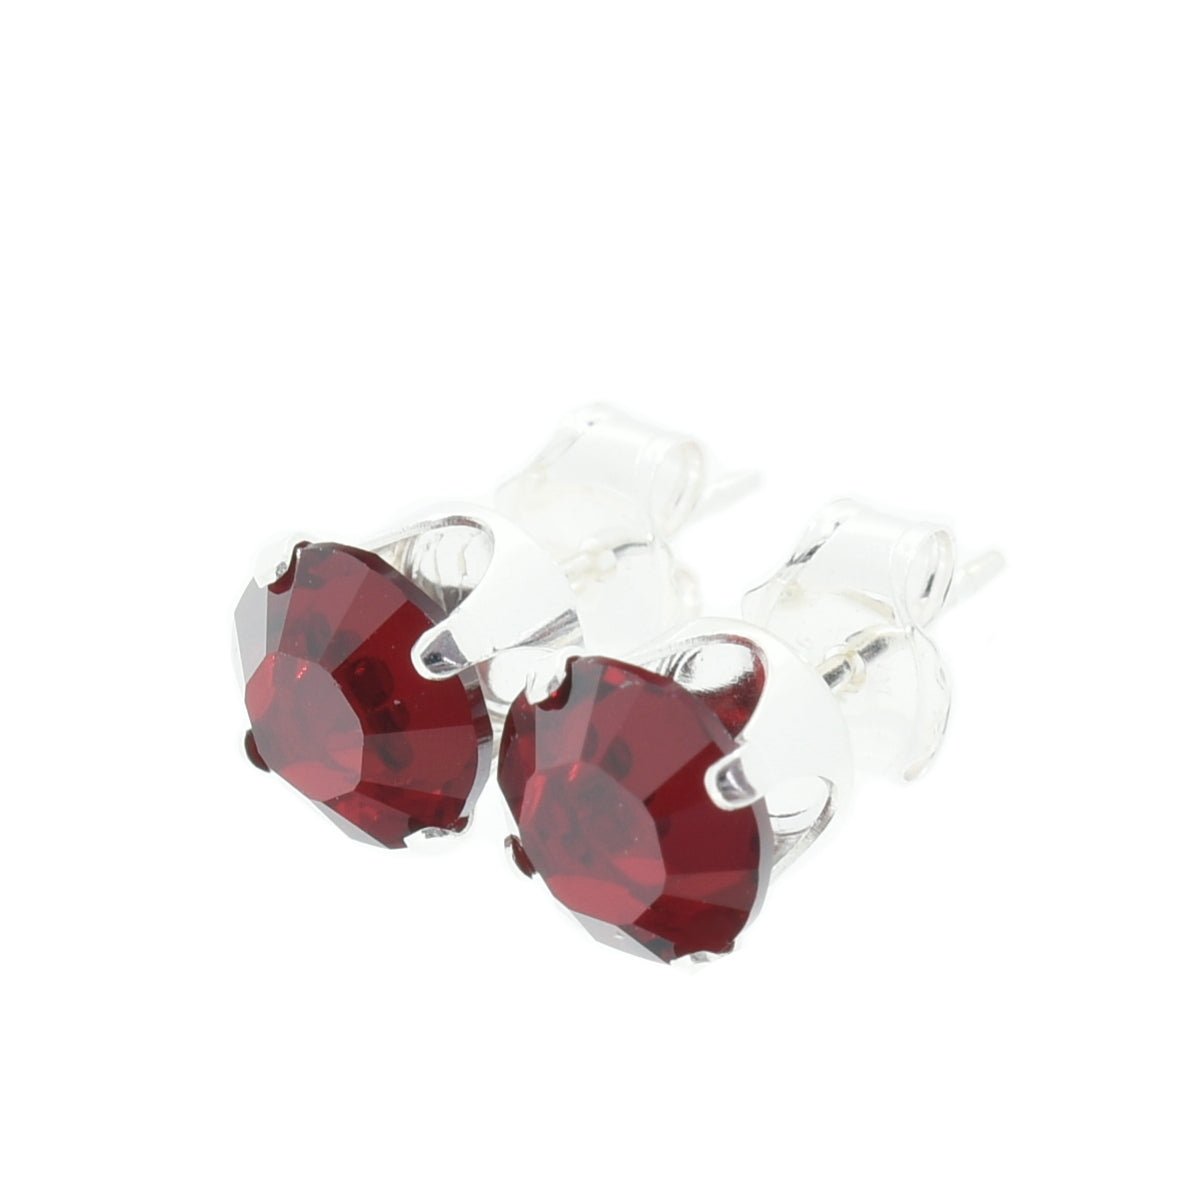 pewterhooter® Women's Classic Collection 925 Sterling silver earrings with sparkling Siam Red channel crystals, packaged in a gift box for any occasion.